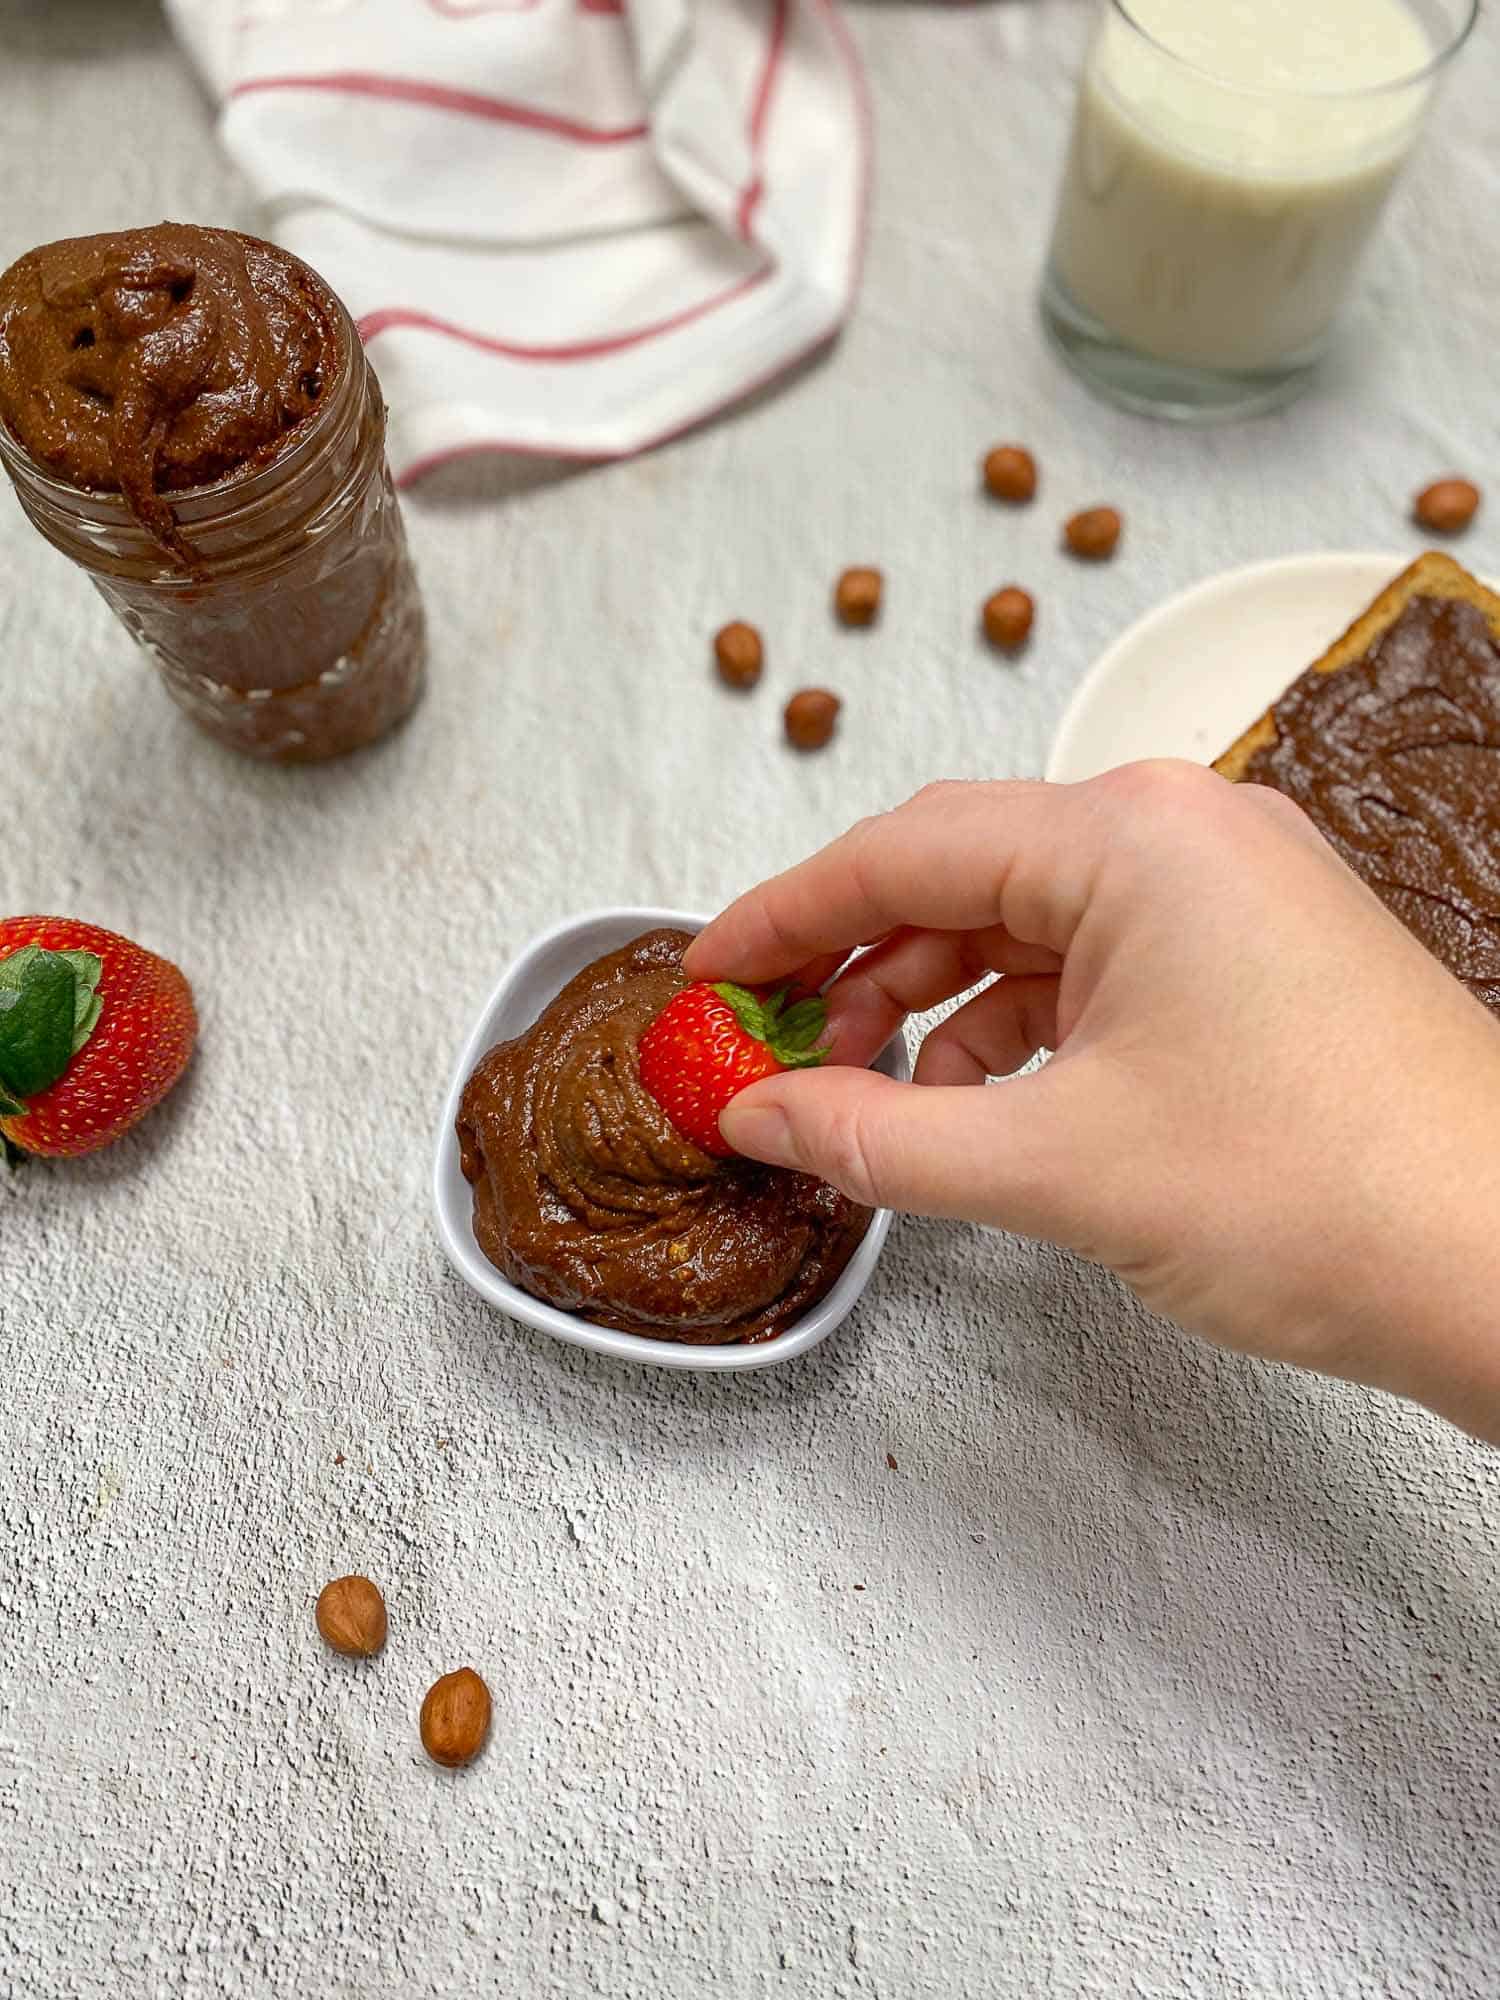 hand dunking strawberry into homemade nutella